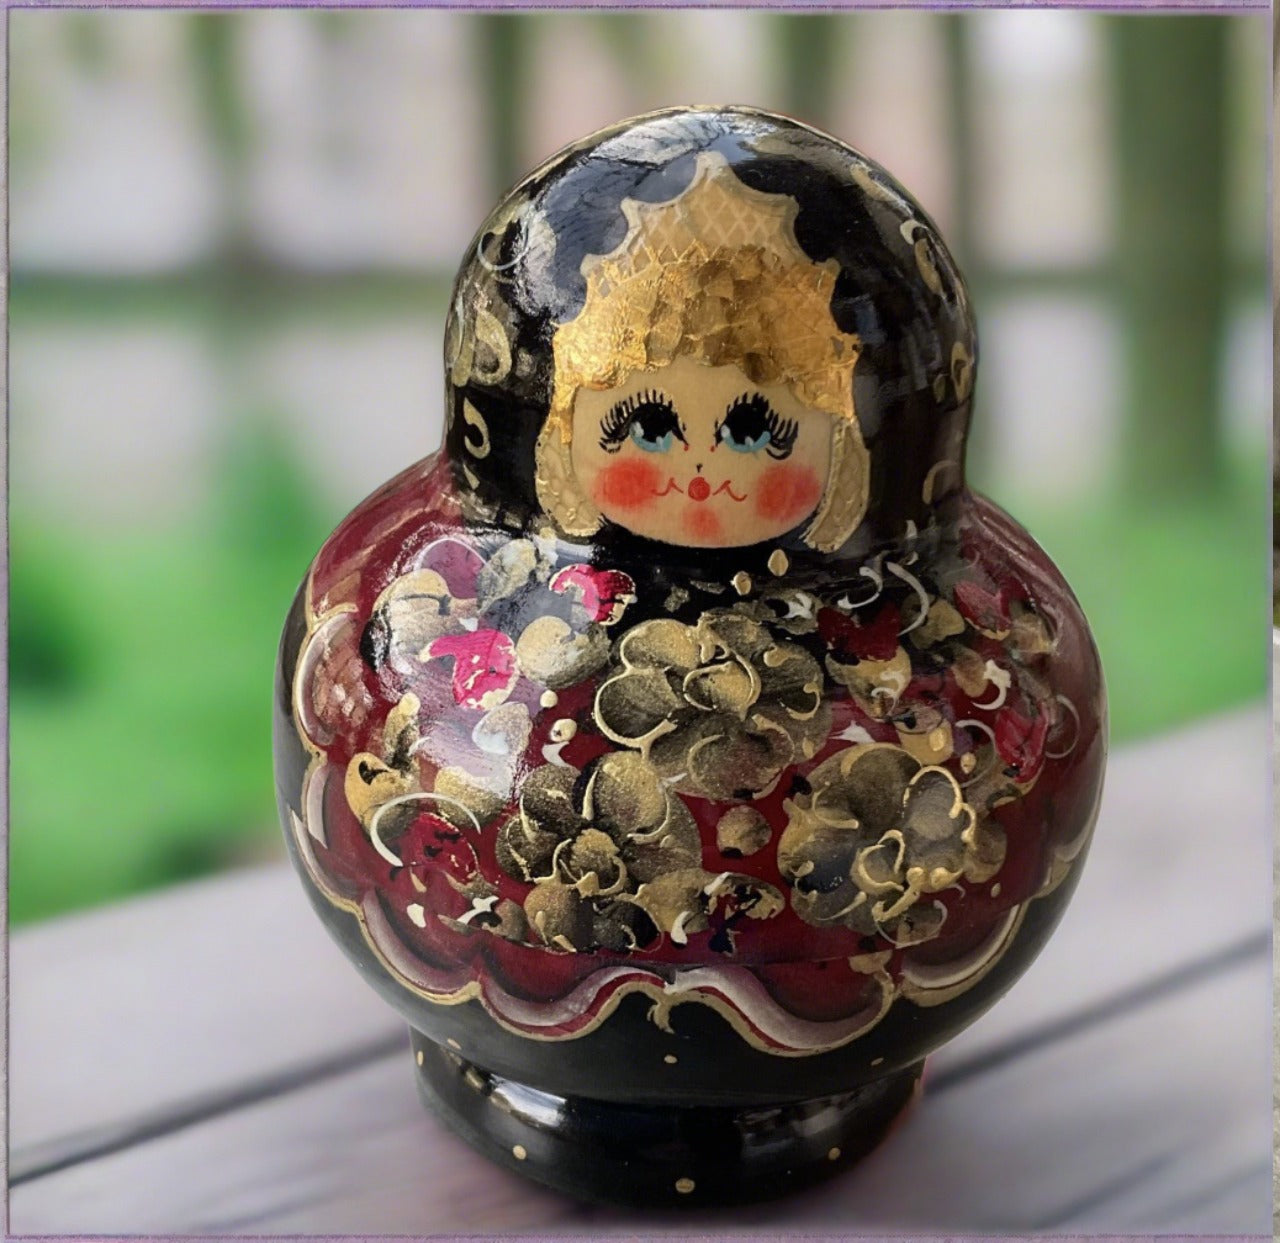 Hand Crafted Russian Stacking Doll- Black, Wine and Gold Color